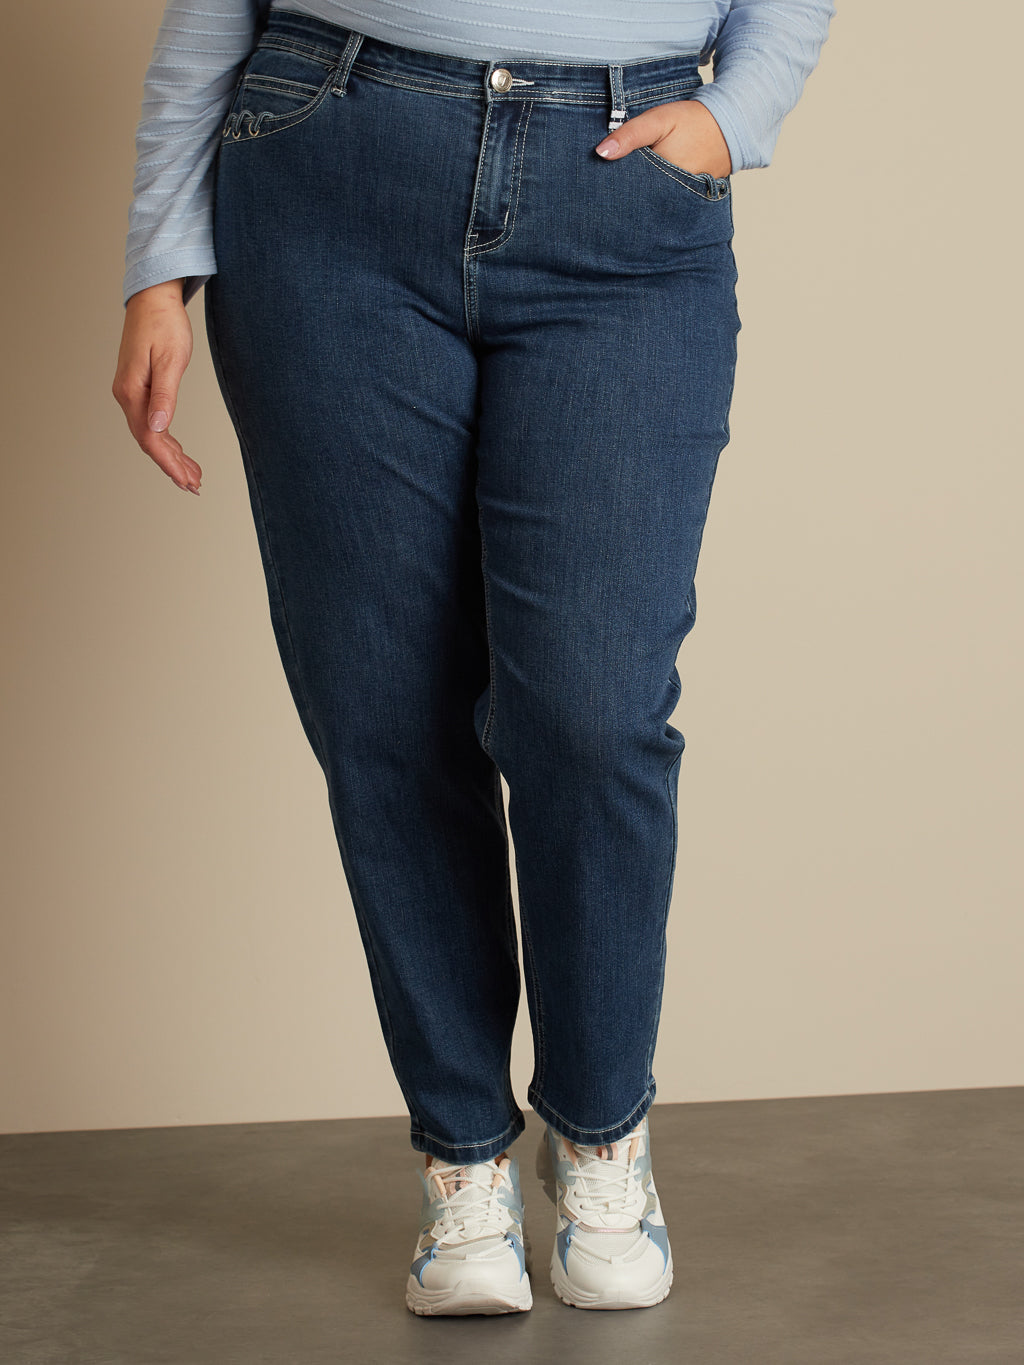 Straight semi-fitted jean